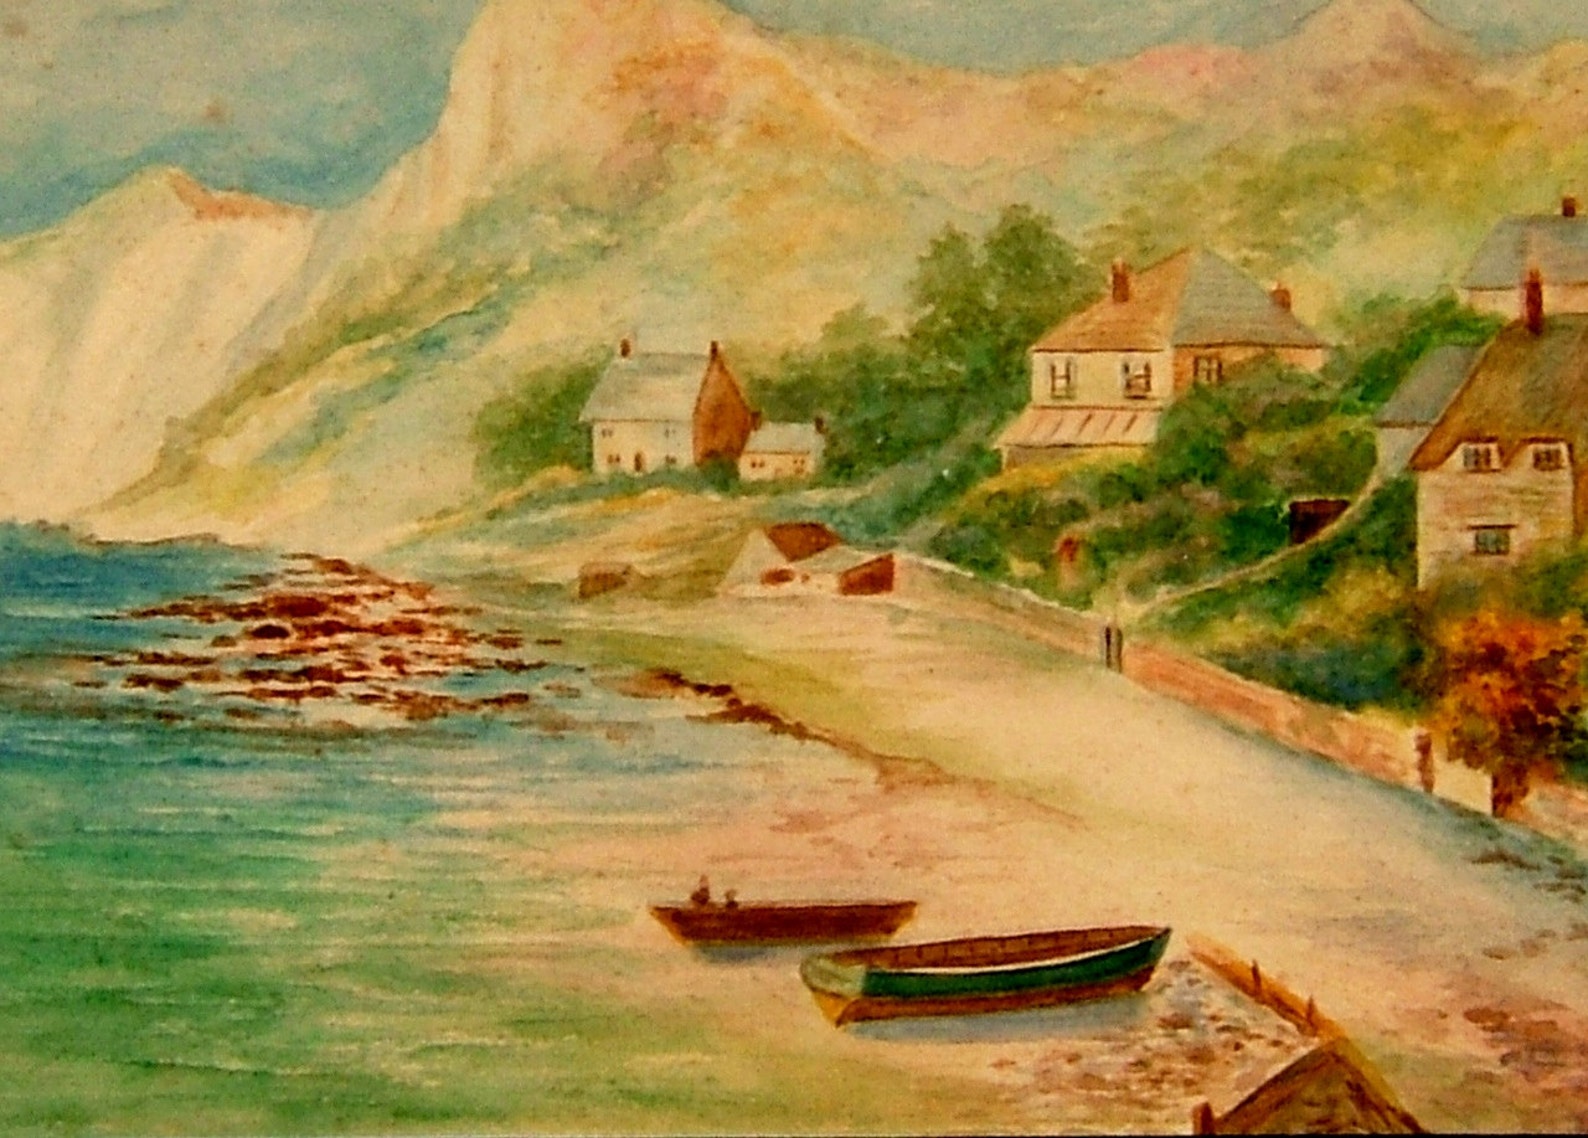 Edwardian Seascape Painting of Houses and Boats on the Beach Etsy